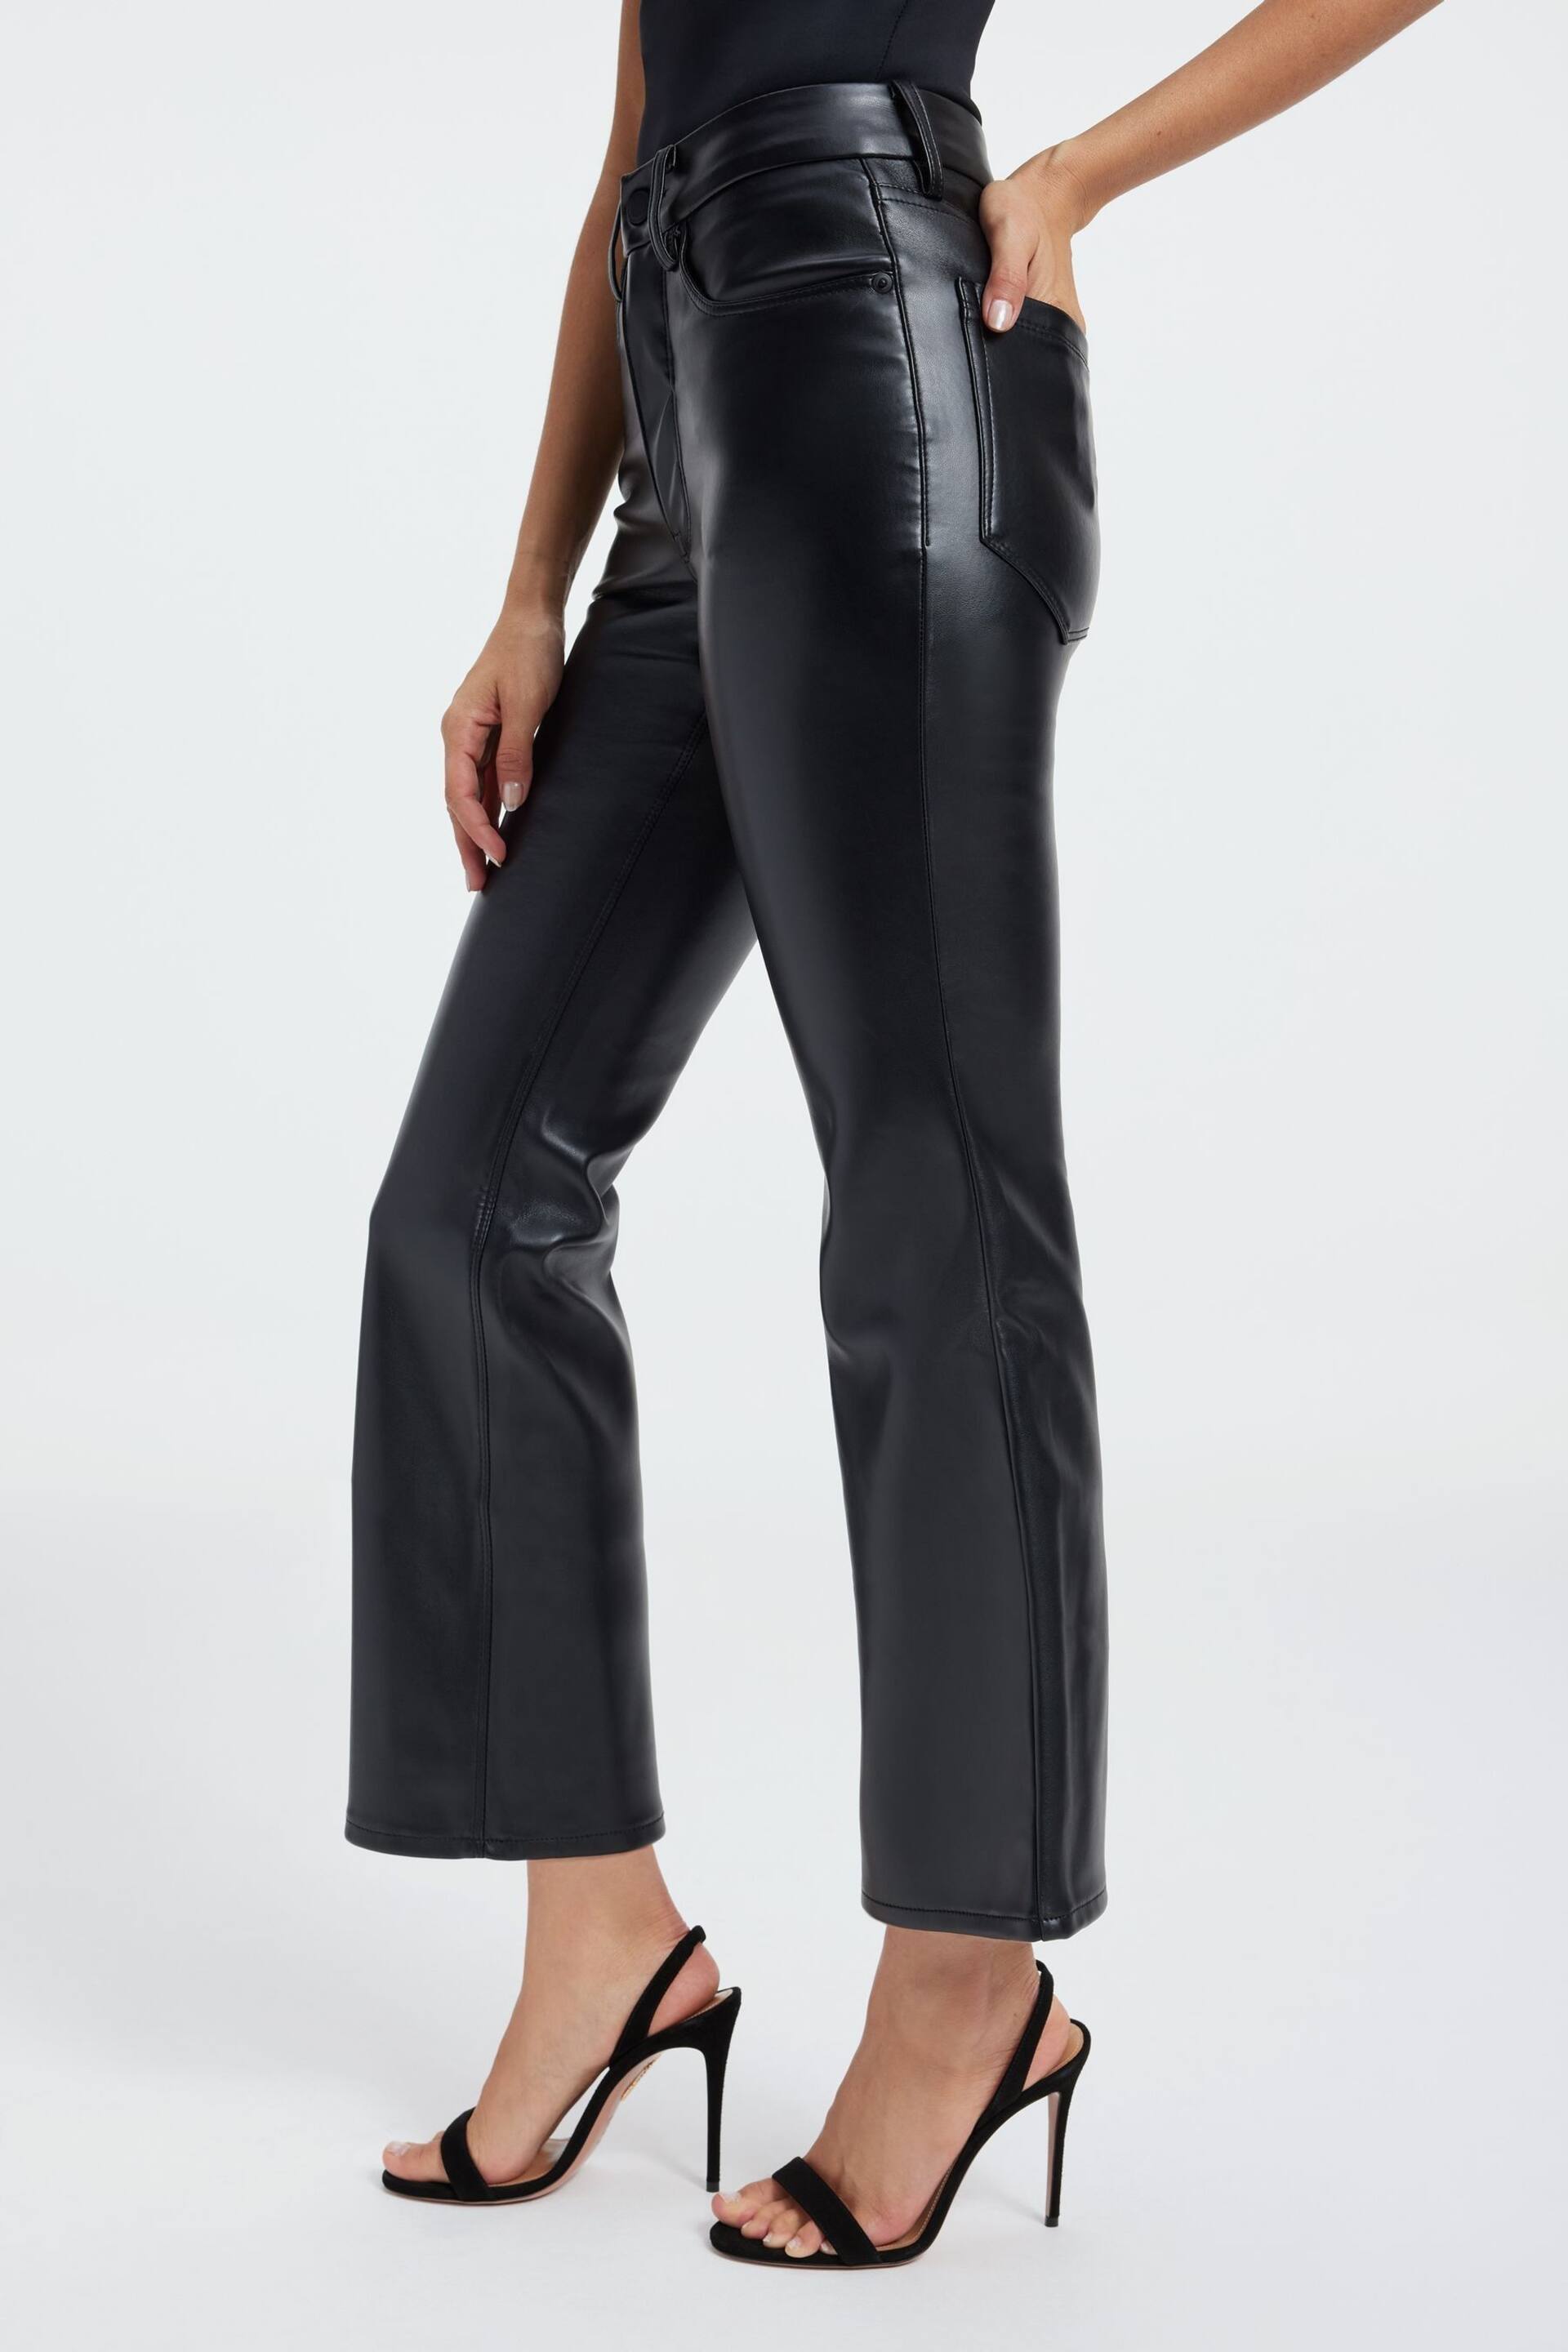 Good American Black Mini Good Legs Crop Boots Luxe Faux Fur Leather Trousers - Image 3 of 6